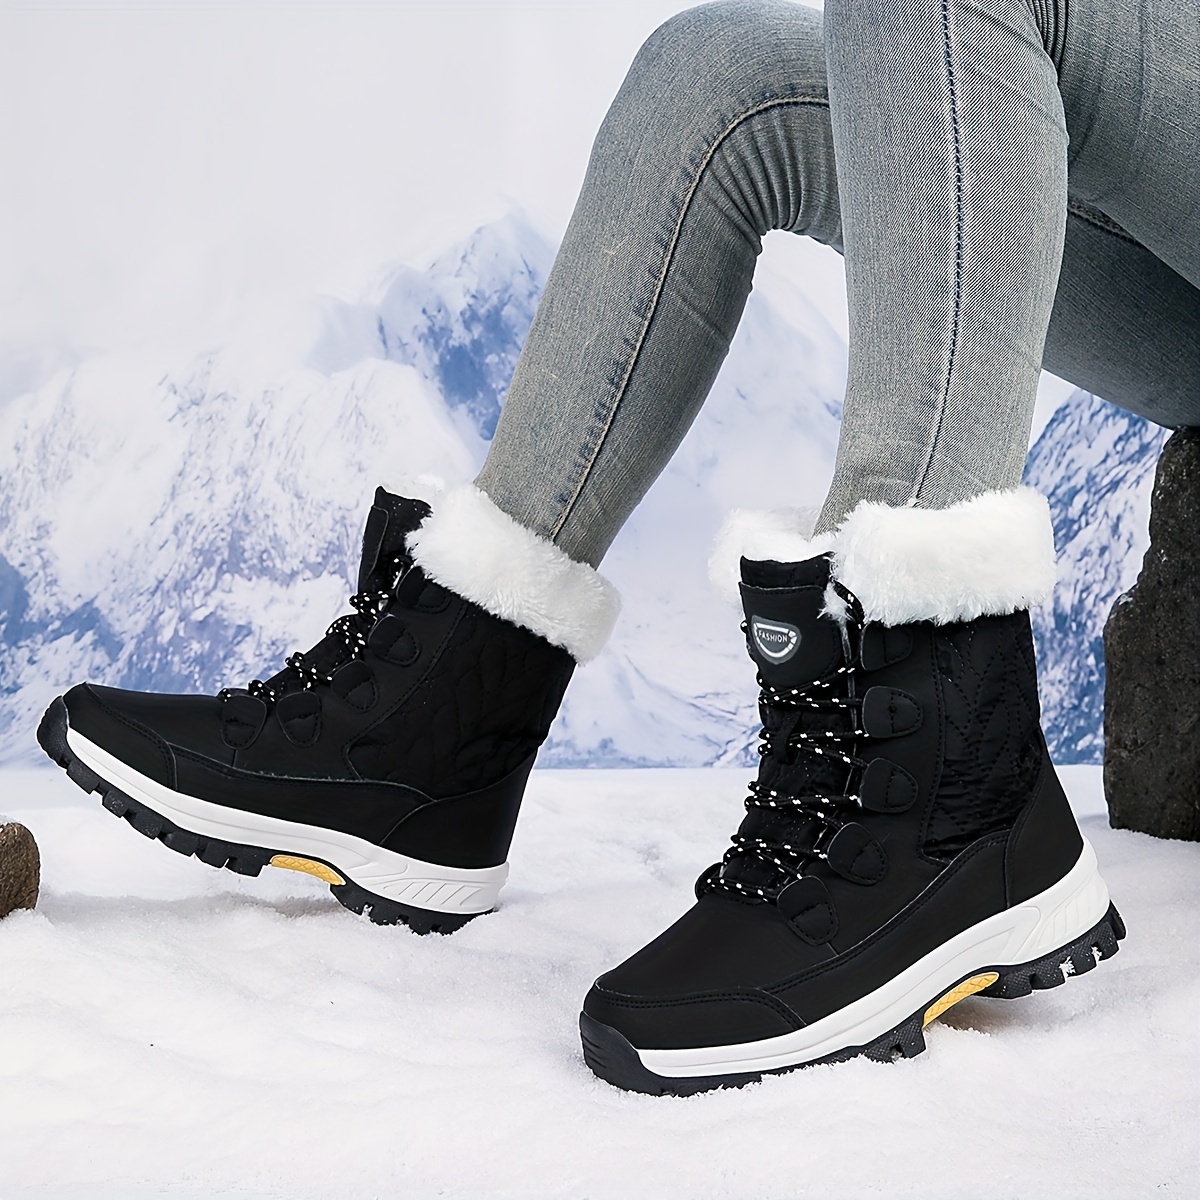 Winter High Top Boots Comfortable Casual Boot Rub Colors Anti